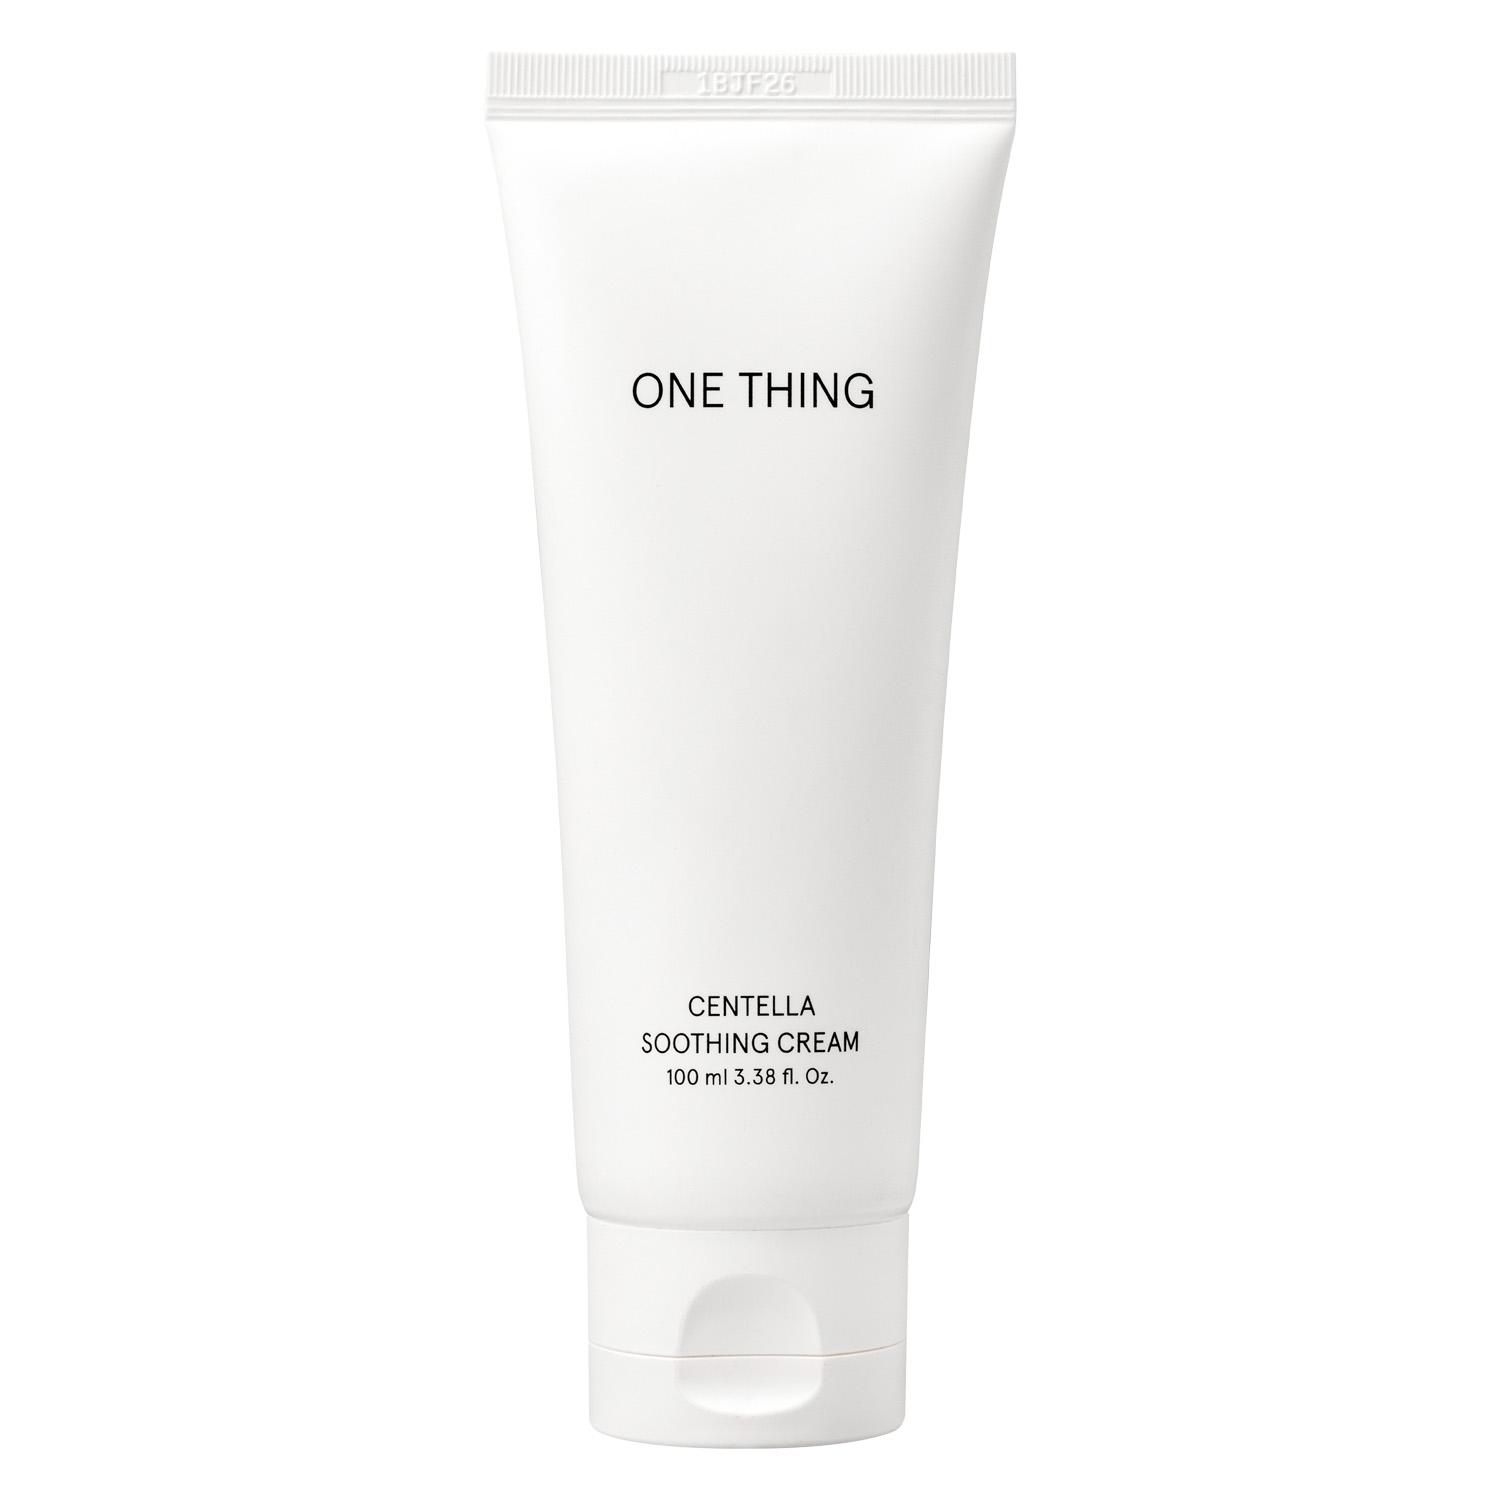 ONE THING - Centella Soothing Cream